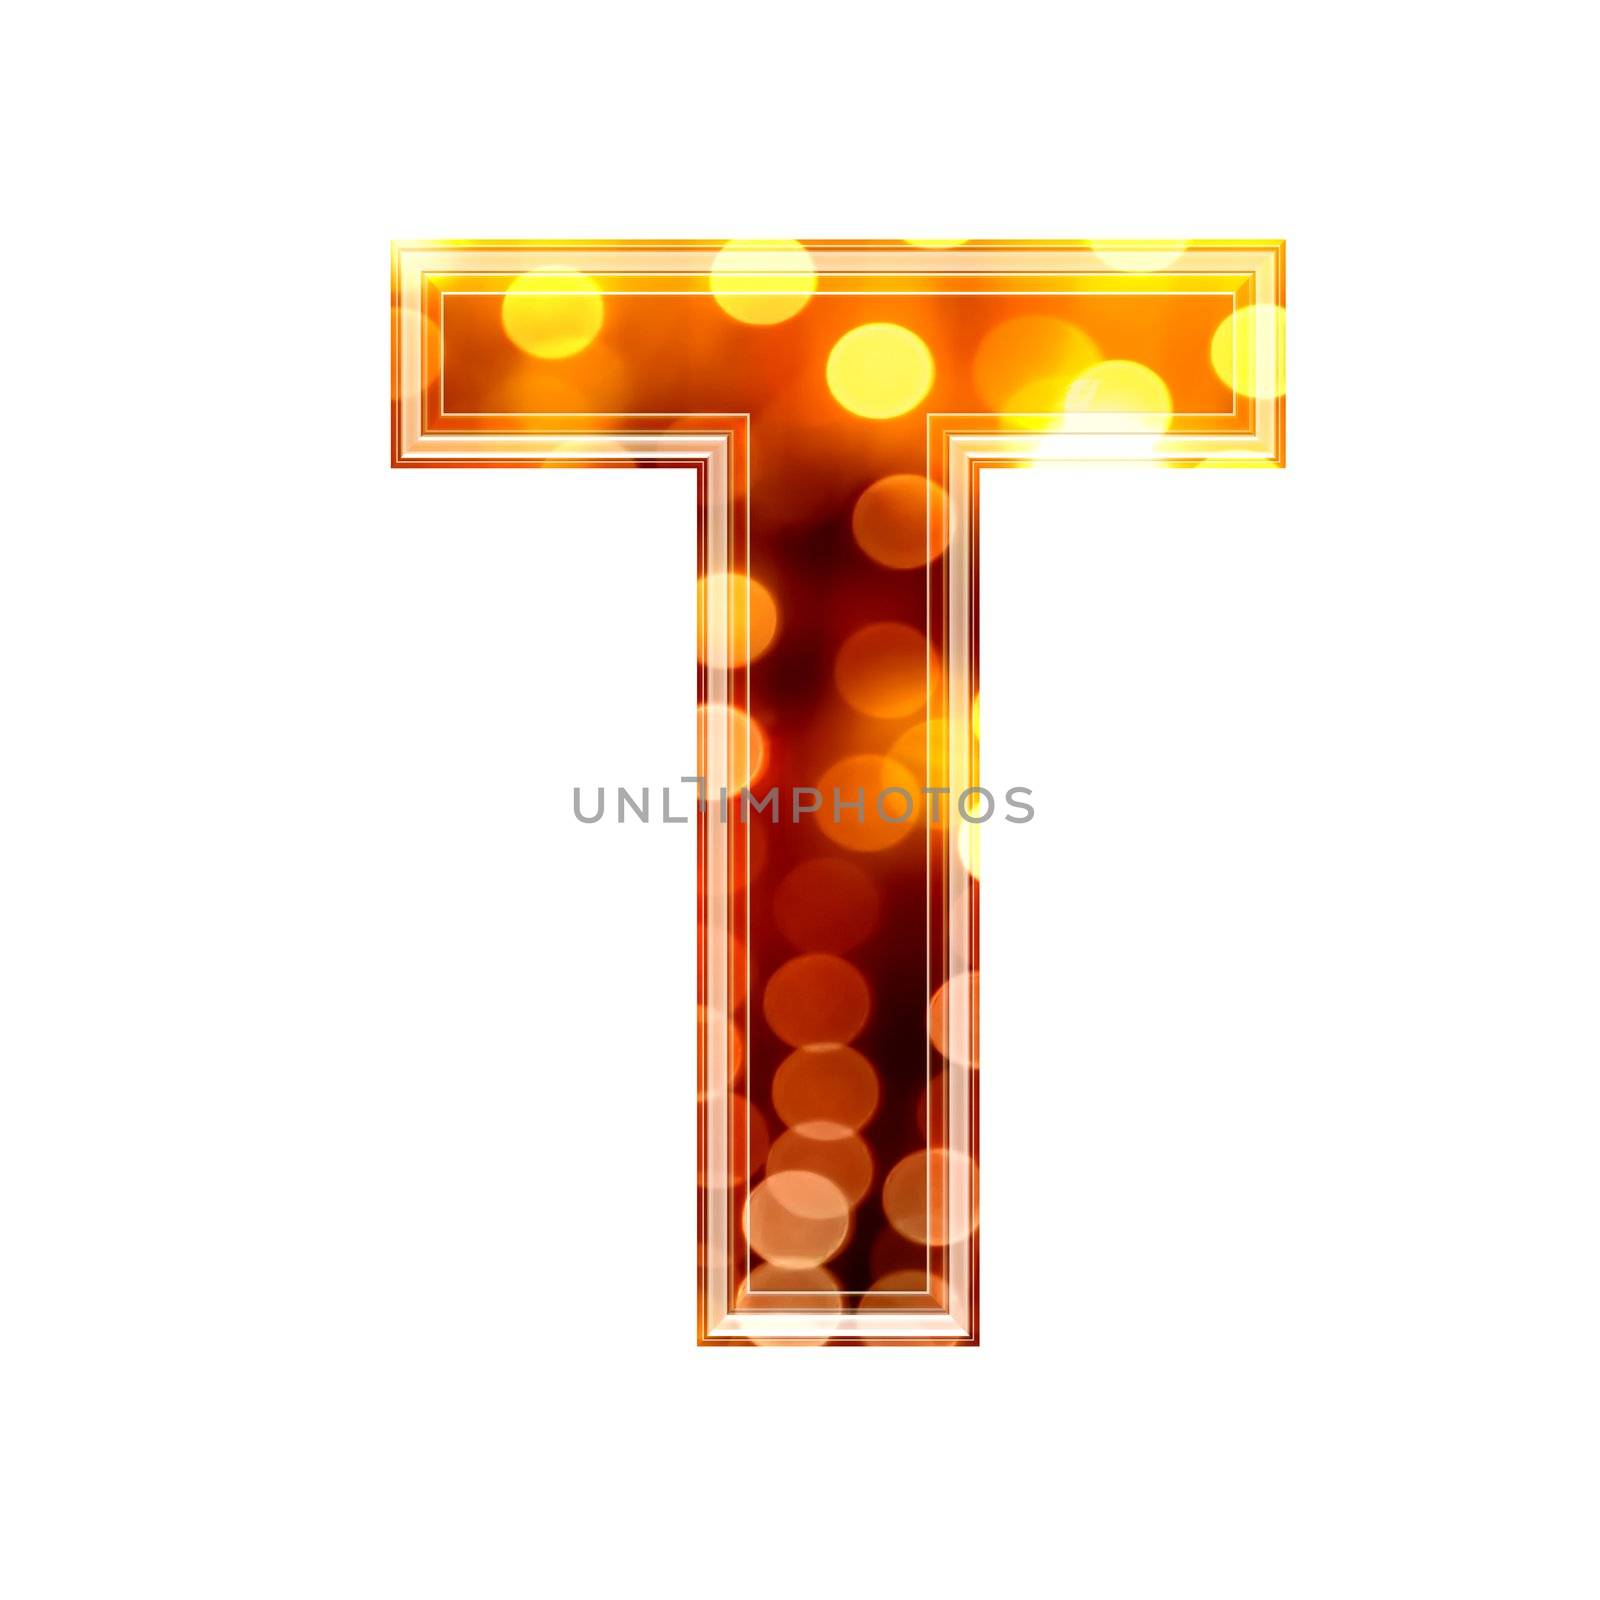 3d letter with glowing lights texture - T by chrisroll